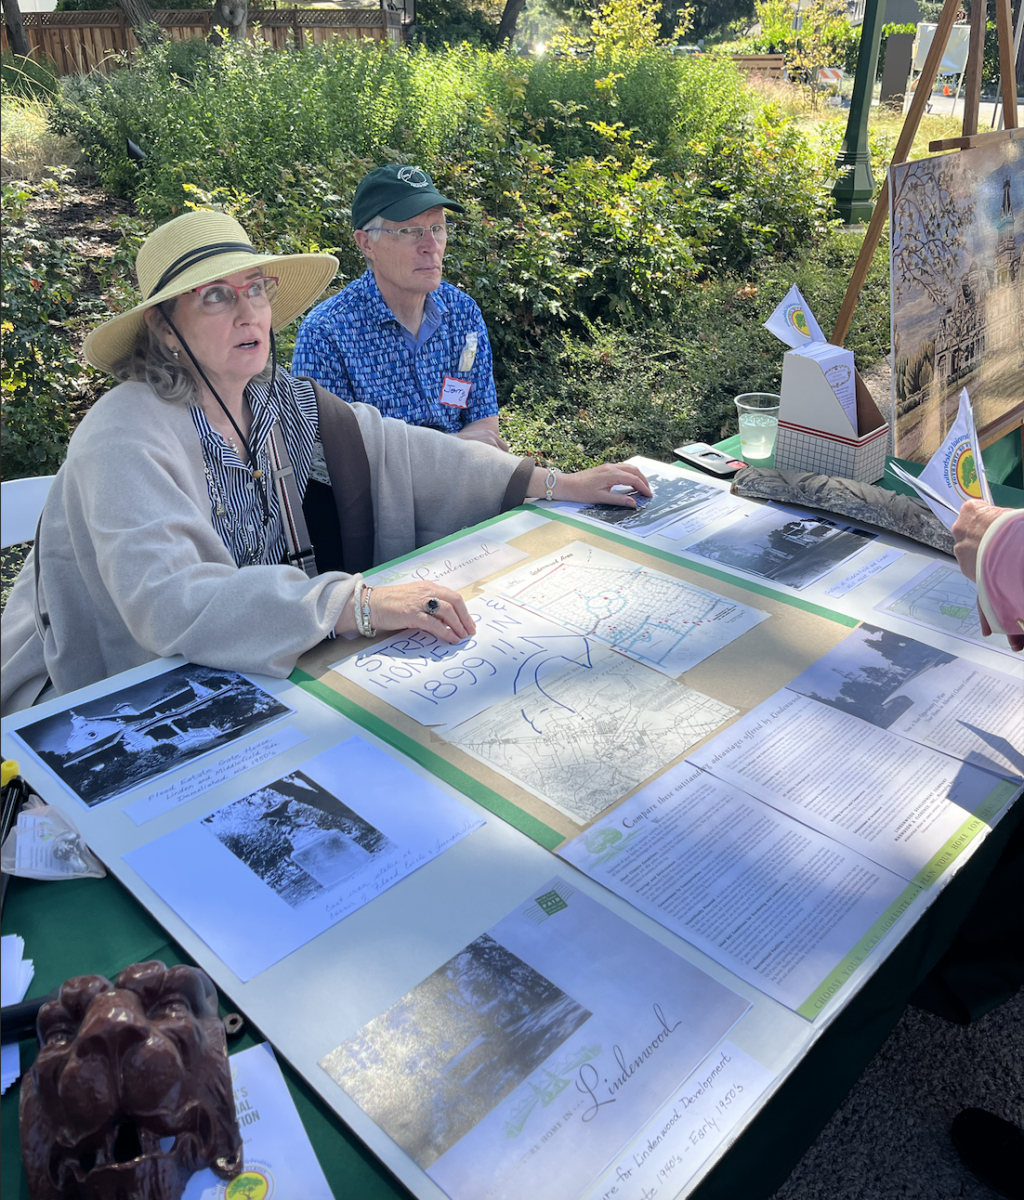 Volunteers run a booth about the history of Lindenwood, one of Athertons neighborhoods. Staff photo: Amelie Giomi